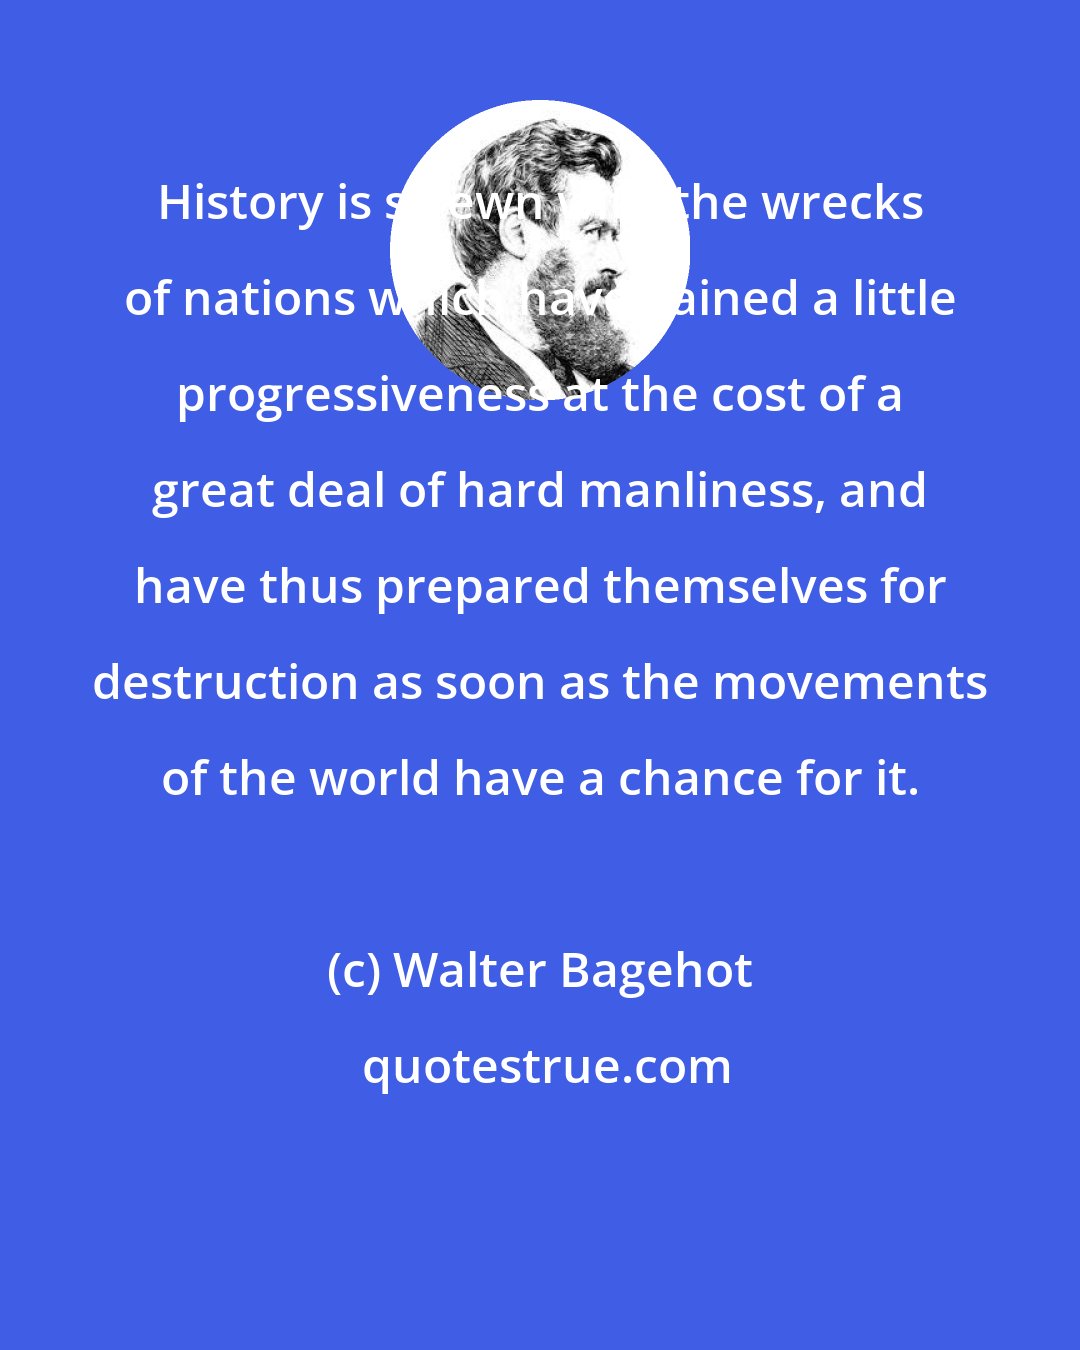 Walter Bagehot: History is strewn with the wrecks of nations which have gained a little progressiveness at the cost of a great deal of hard manliness, and have thus prepared themselves for destruction as soon as the movements of the world have a chance for it.